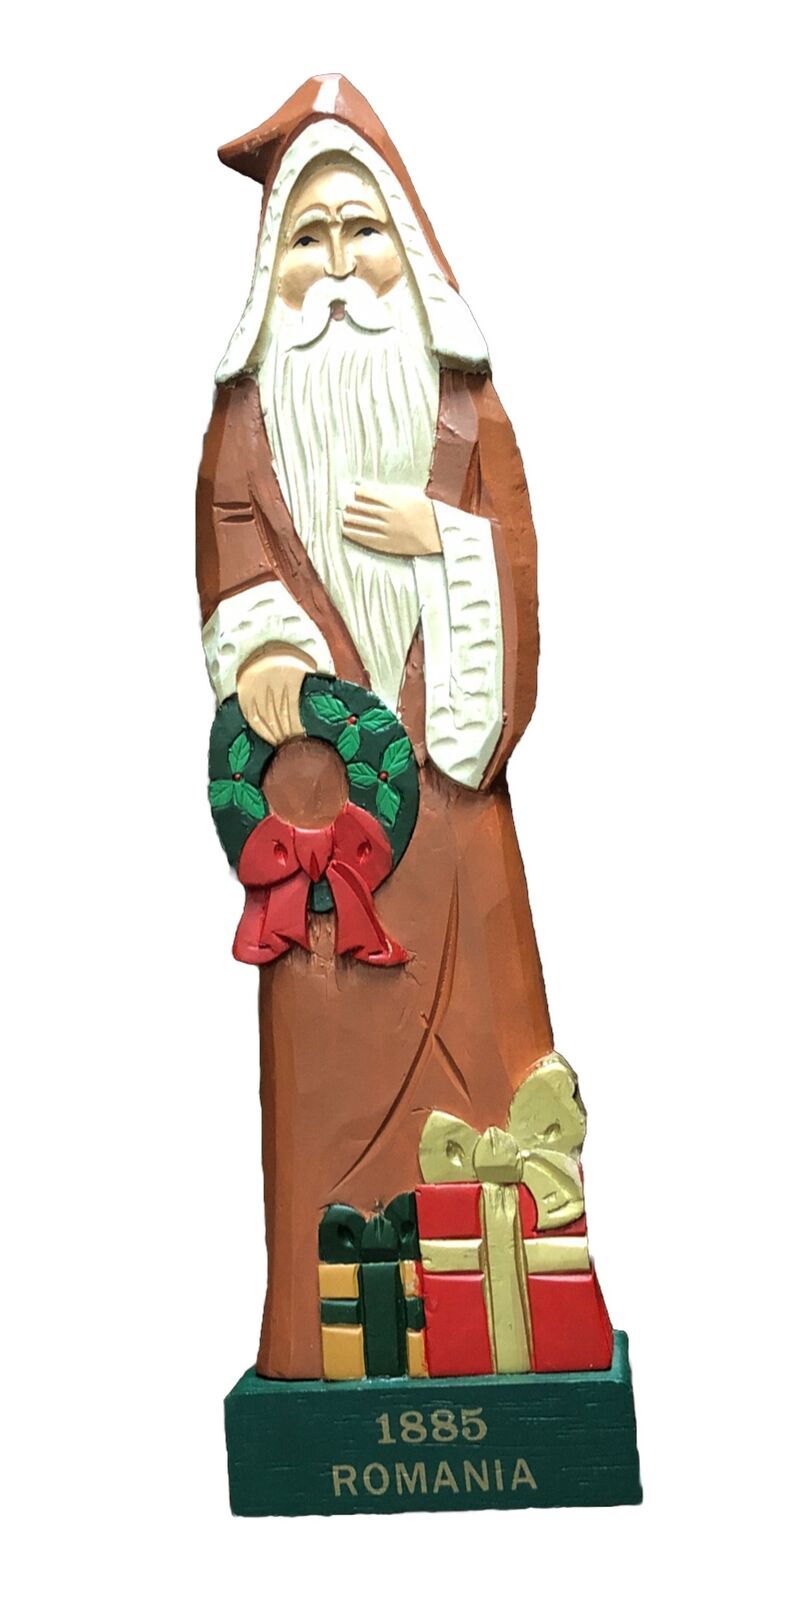 Mercuries Carved Wood Painted Santa Of The World ROMANIA 1885 12” Tall Vintage